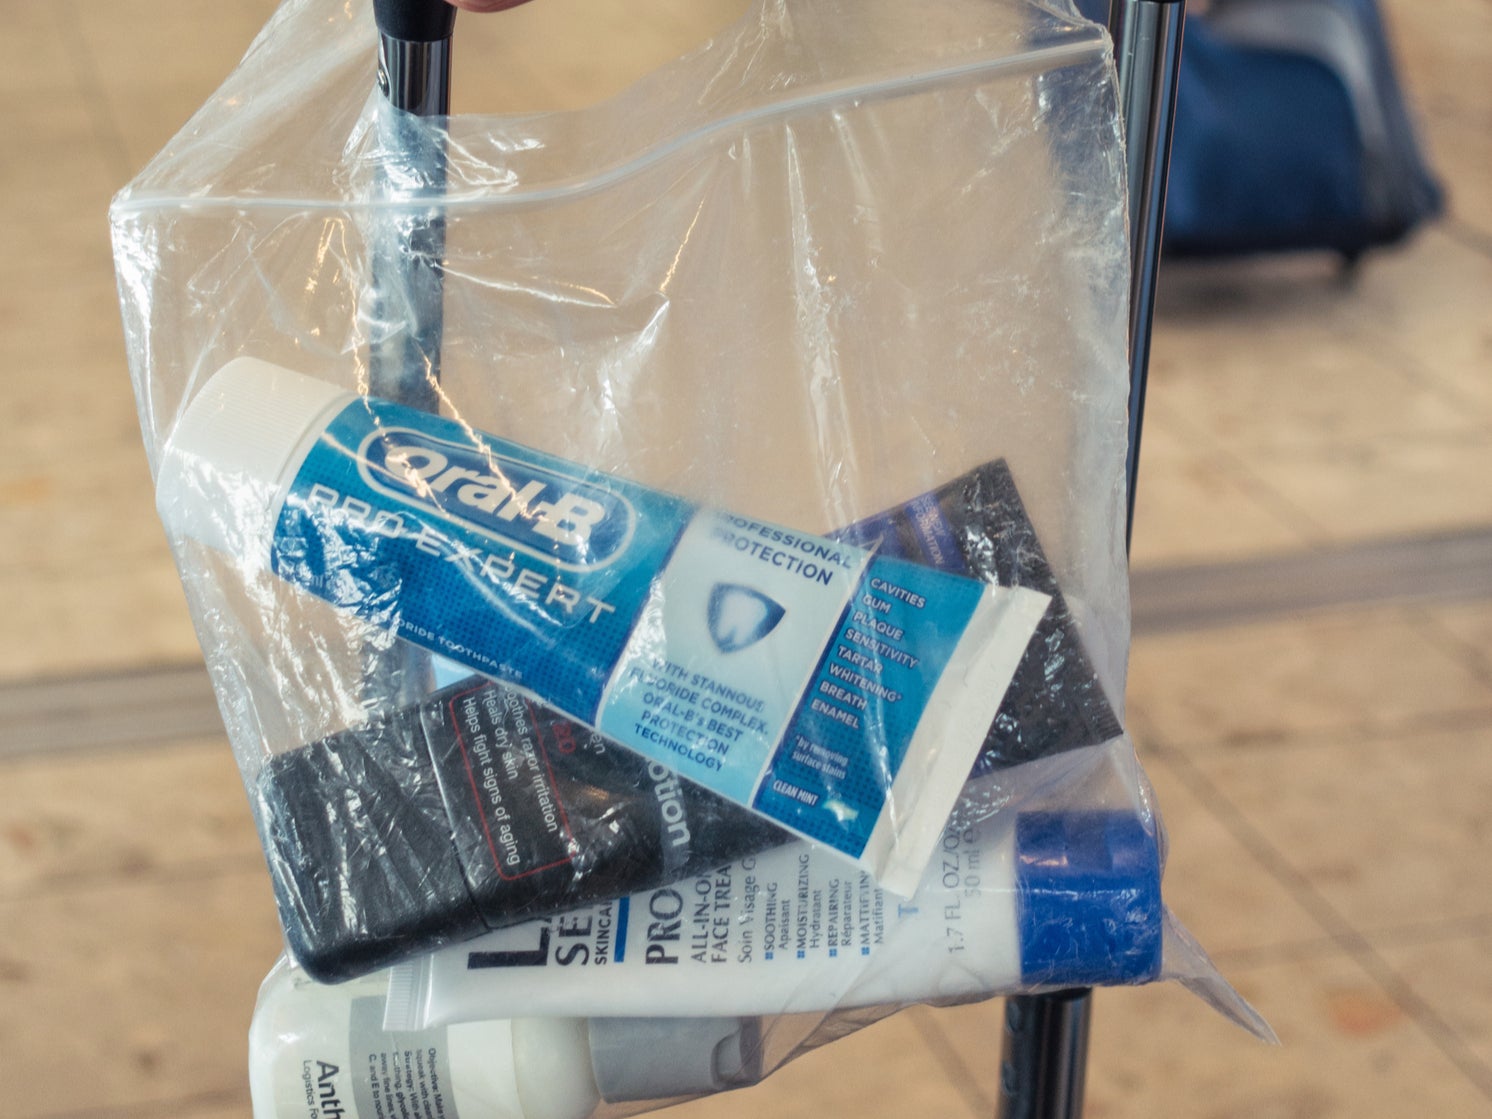 A transparent bag containing small bottles of liquid in compliance with airport security